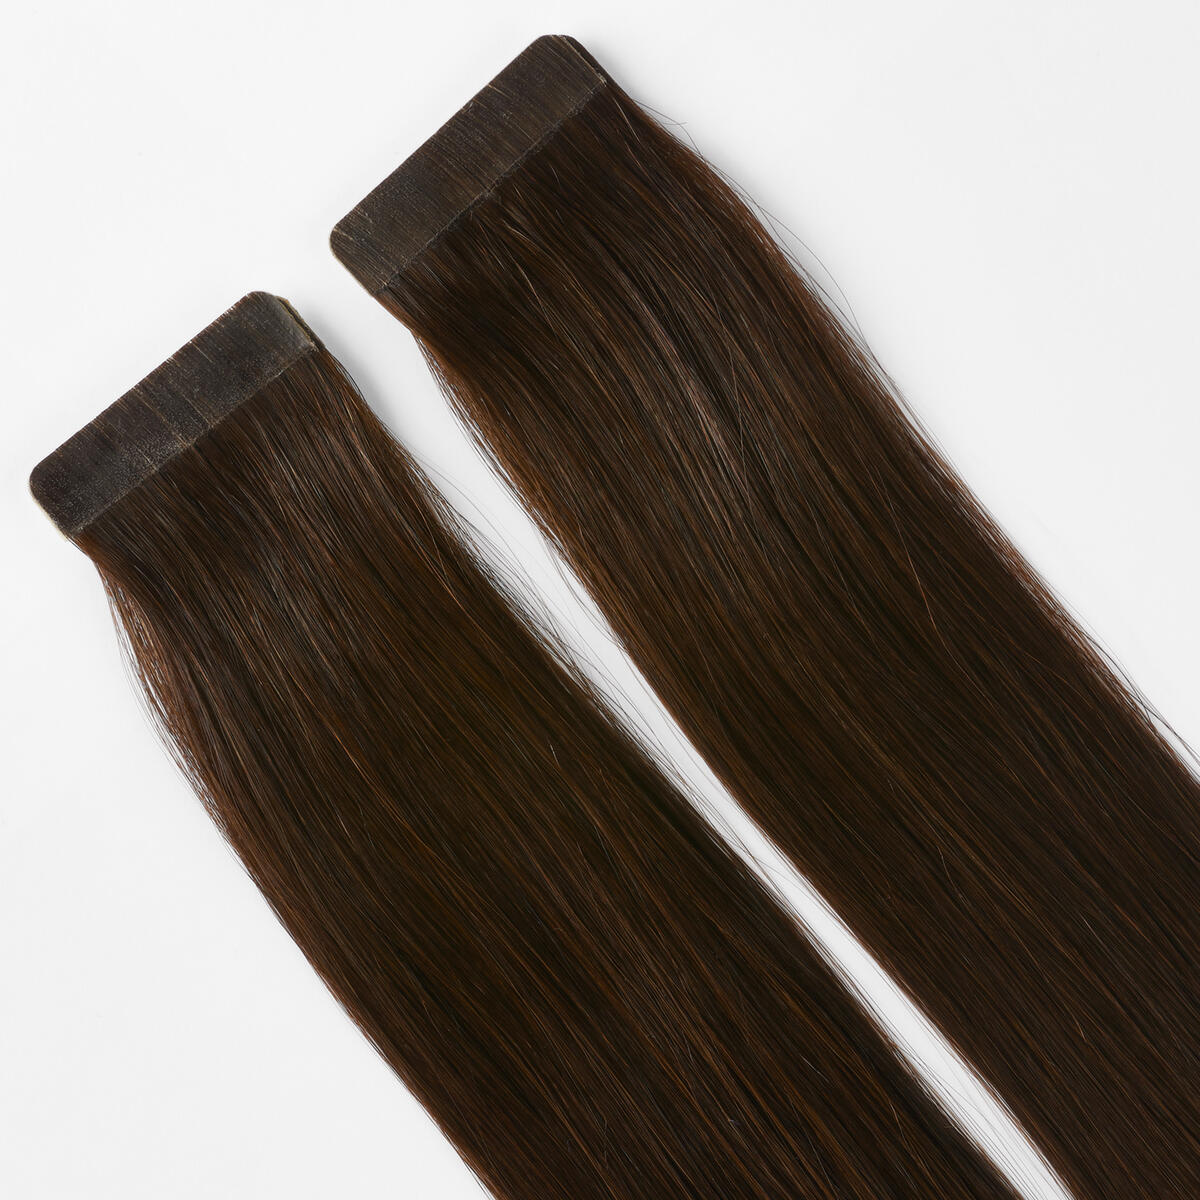 Basic Tape Extensions Classic 4 2.3 Chocolate Brown 40 cm